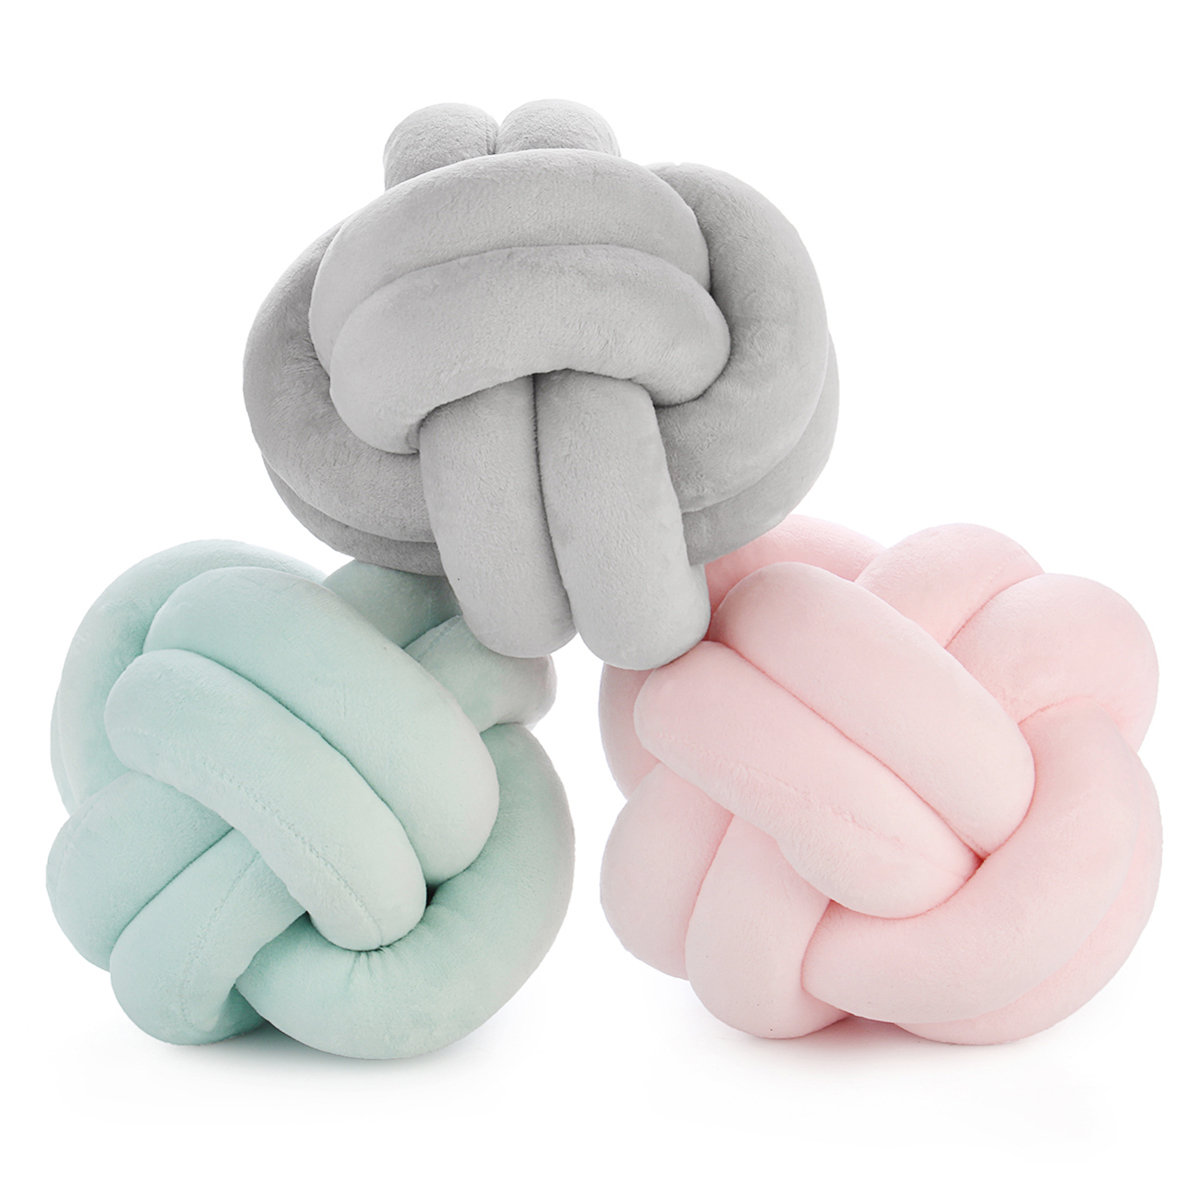 

Innovative Handmade Knotted Knot Ball Home Baby Sweet Pillow Sofa Cushion Simple Car Decorative Pillows Cushions, Grey green pink